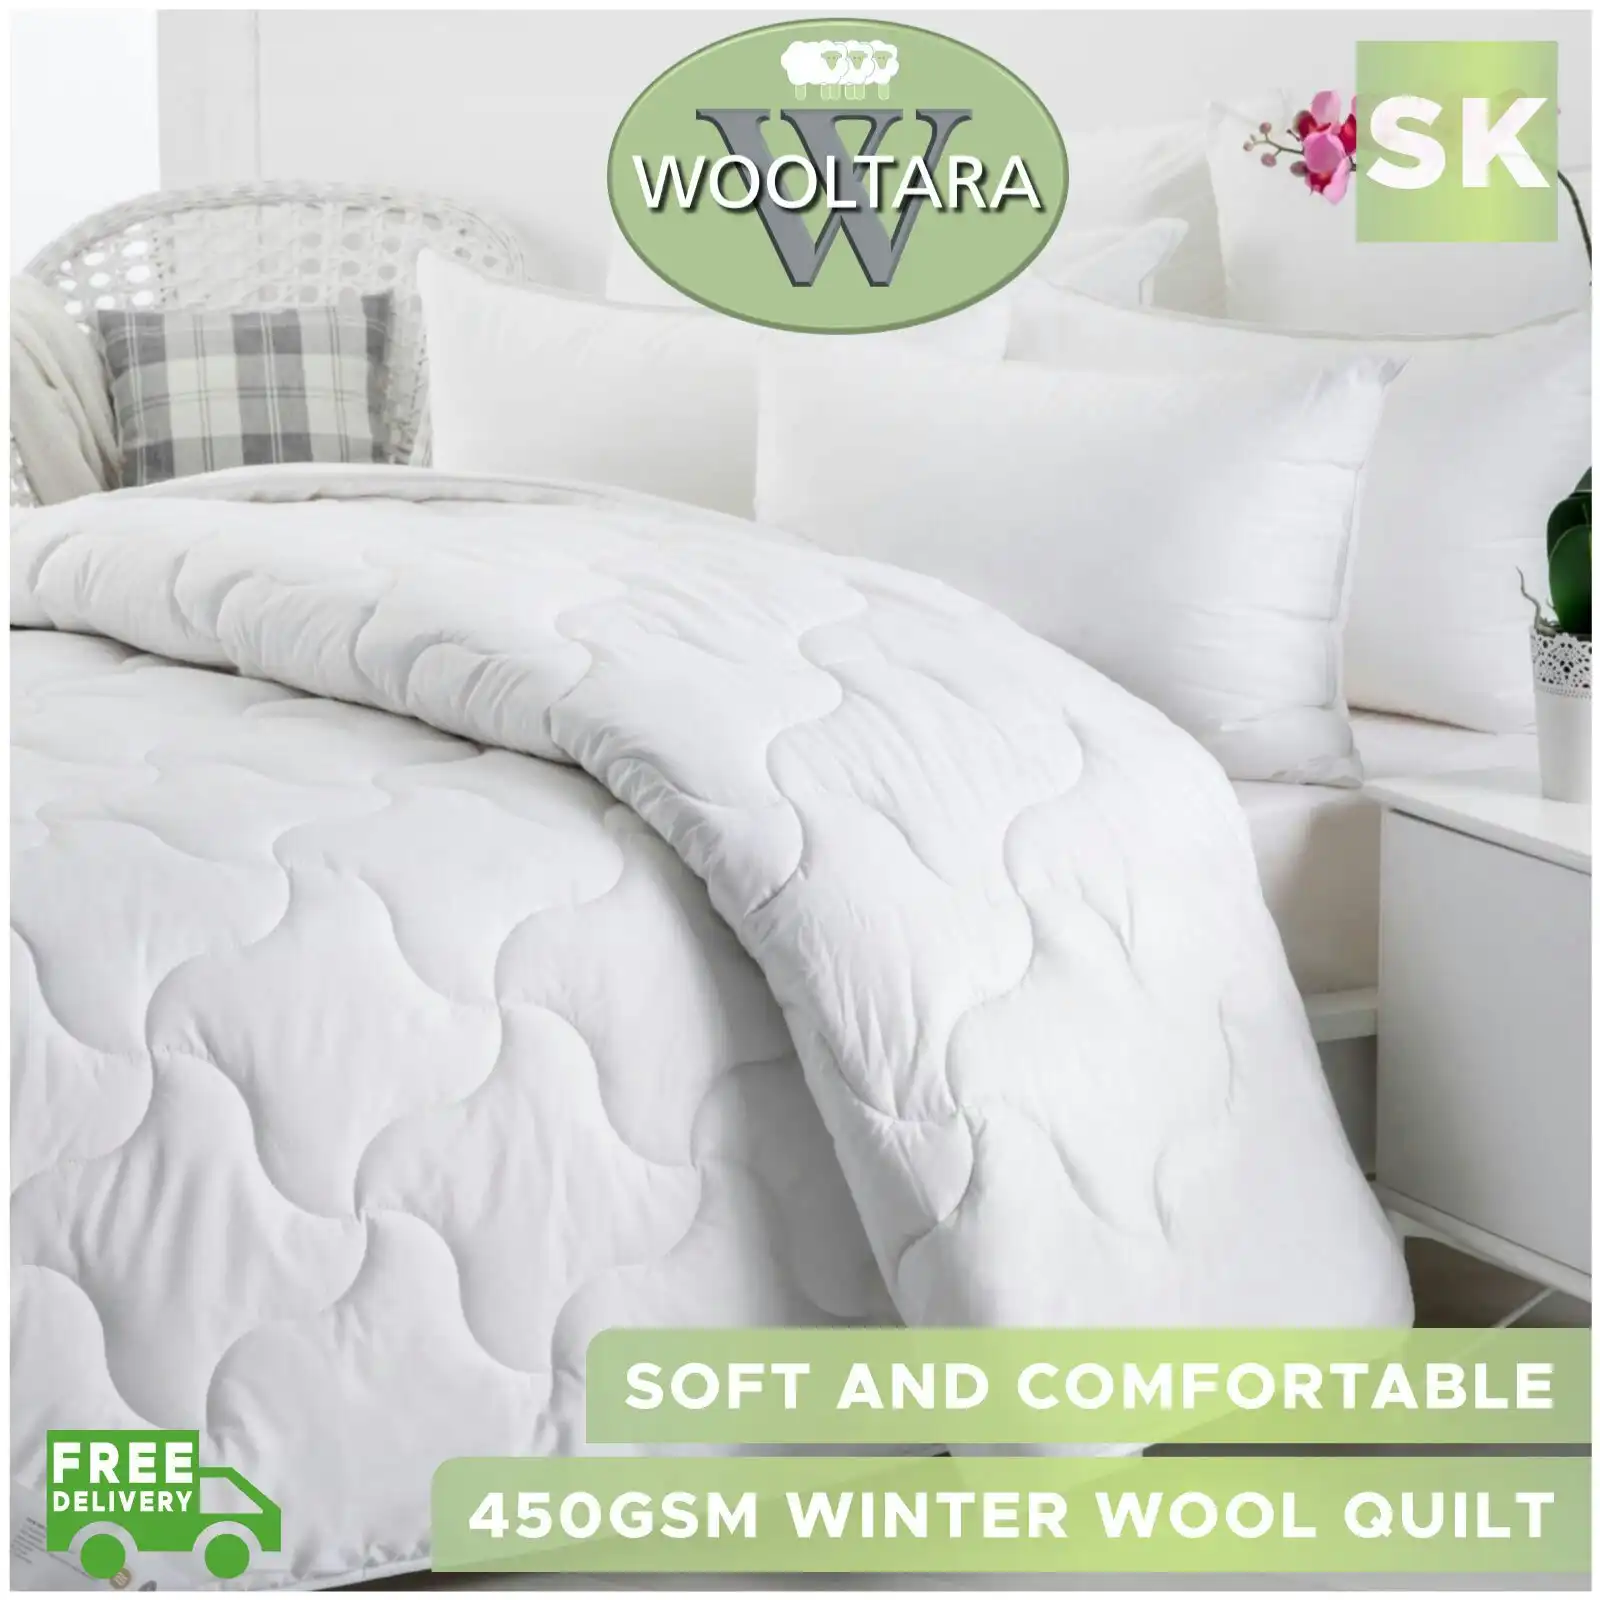 Wooltara Imperial Luxury 450GSM Washable Winter Australia Wool Quilt - Super King Bed